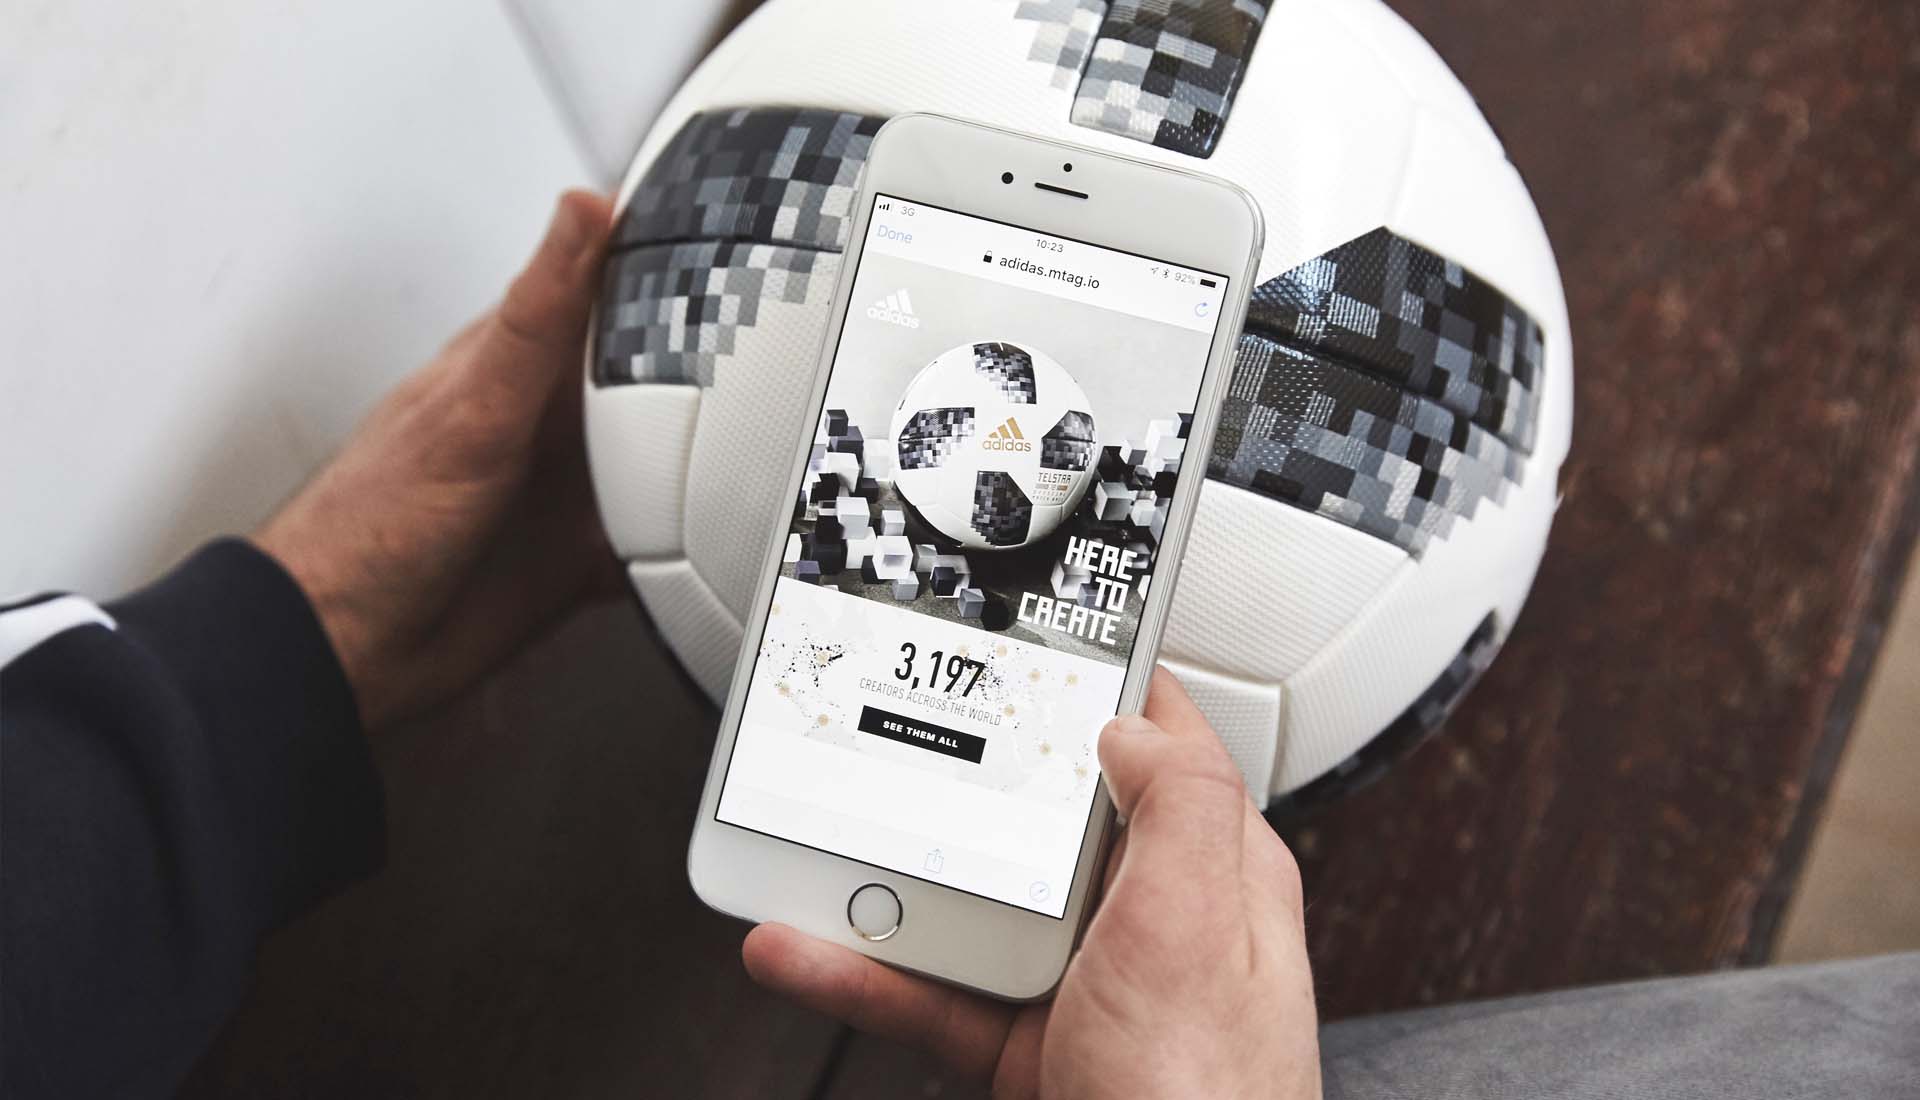 Learn about the adidas Telstar 18 - the official ball at the 2018 World Cup